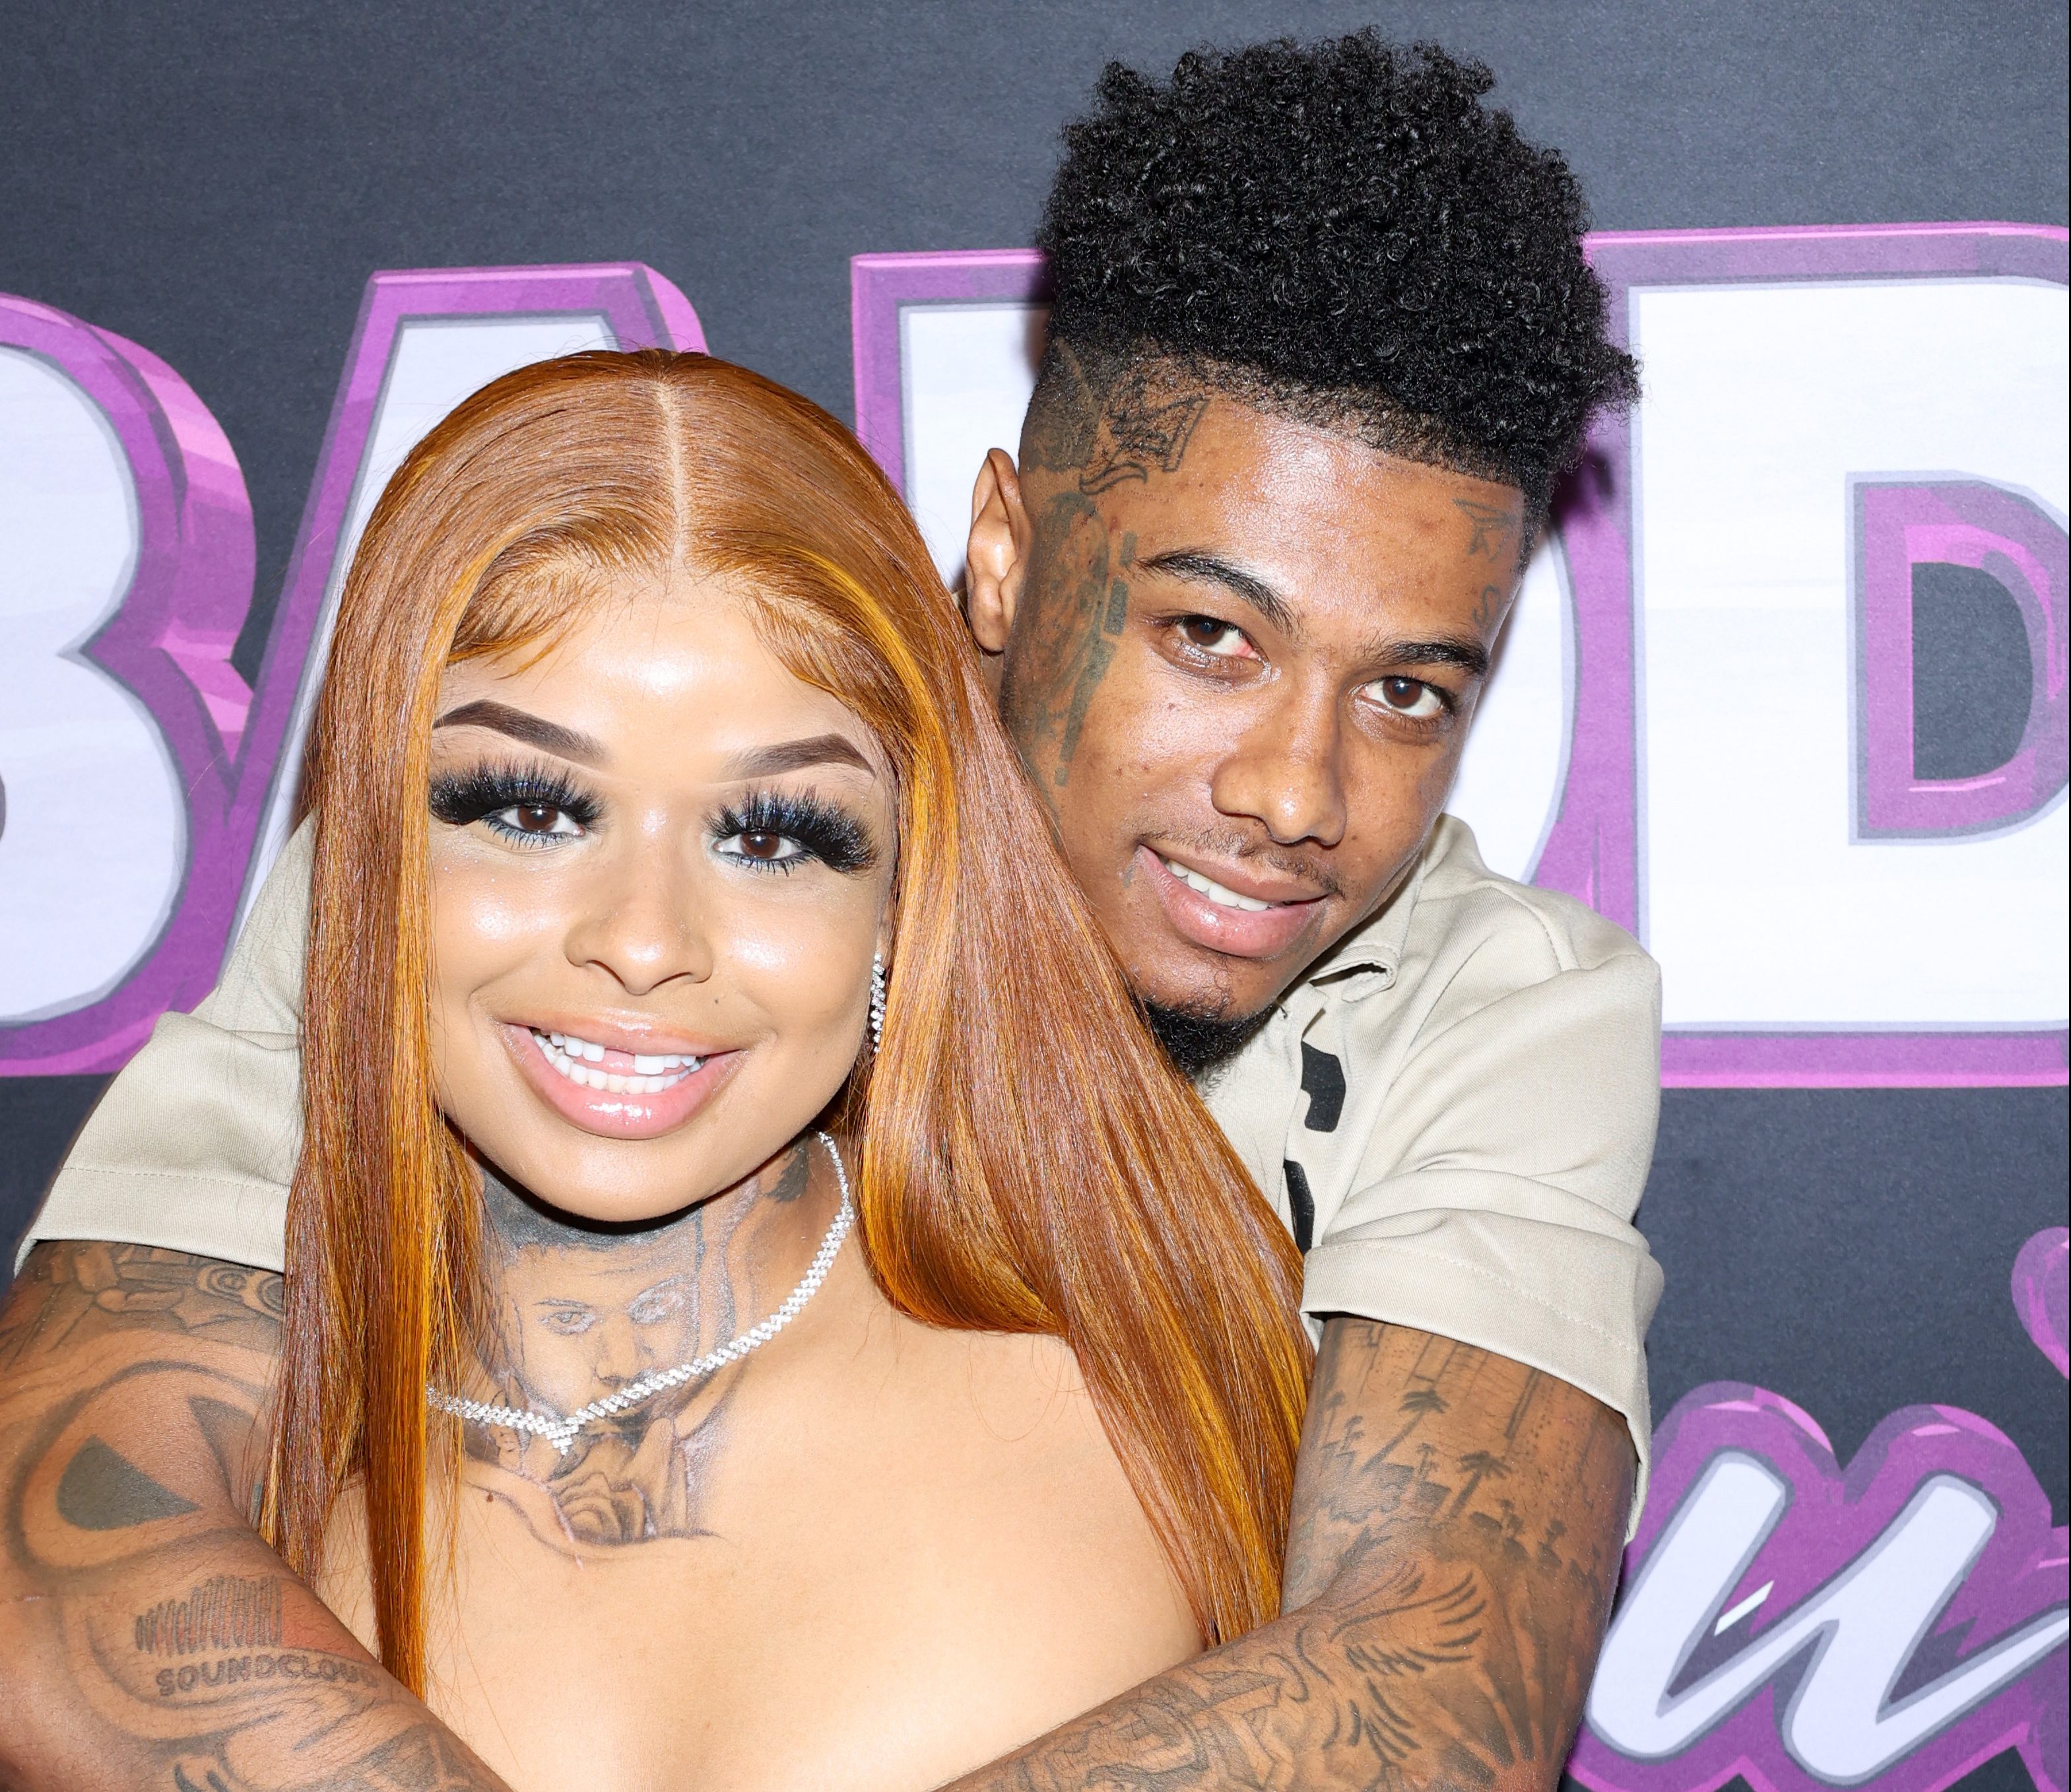 Blueface Calls Chrisean Rock A “Cellmate,” Rather Than A “Soulmate”: Watch